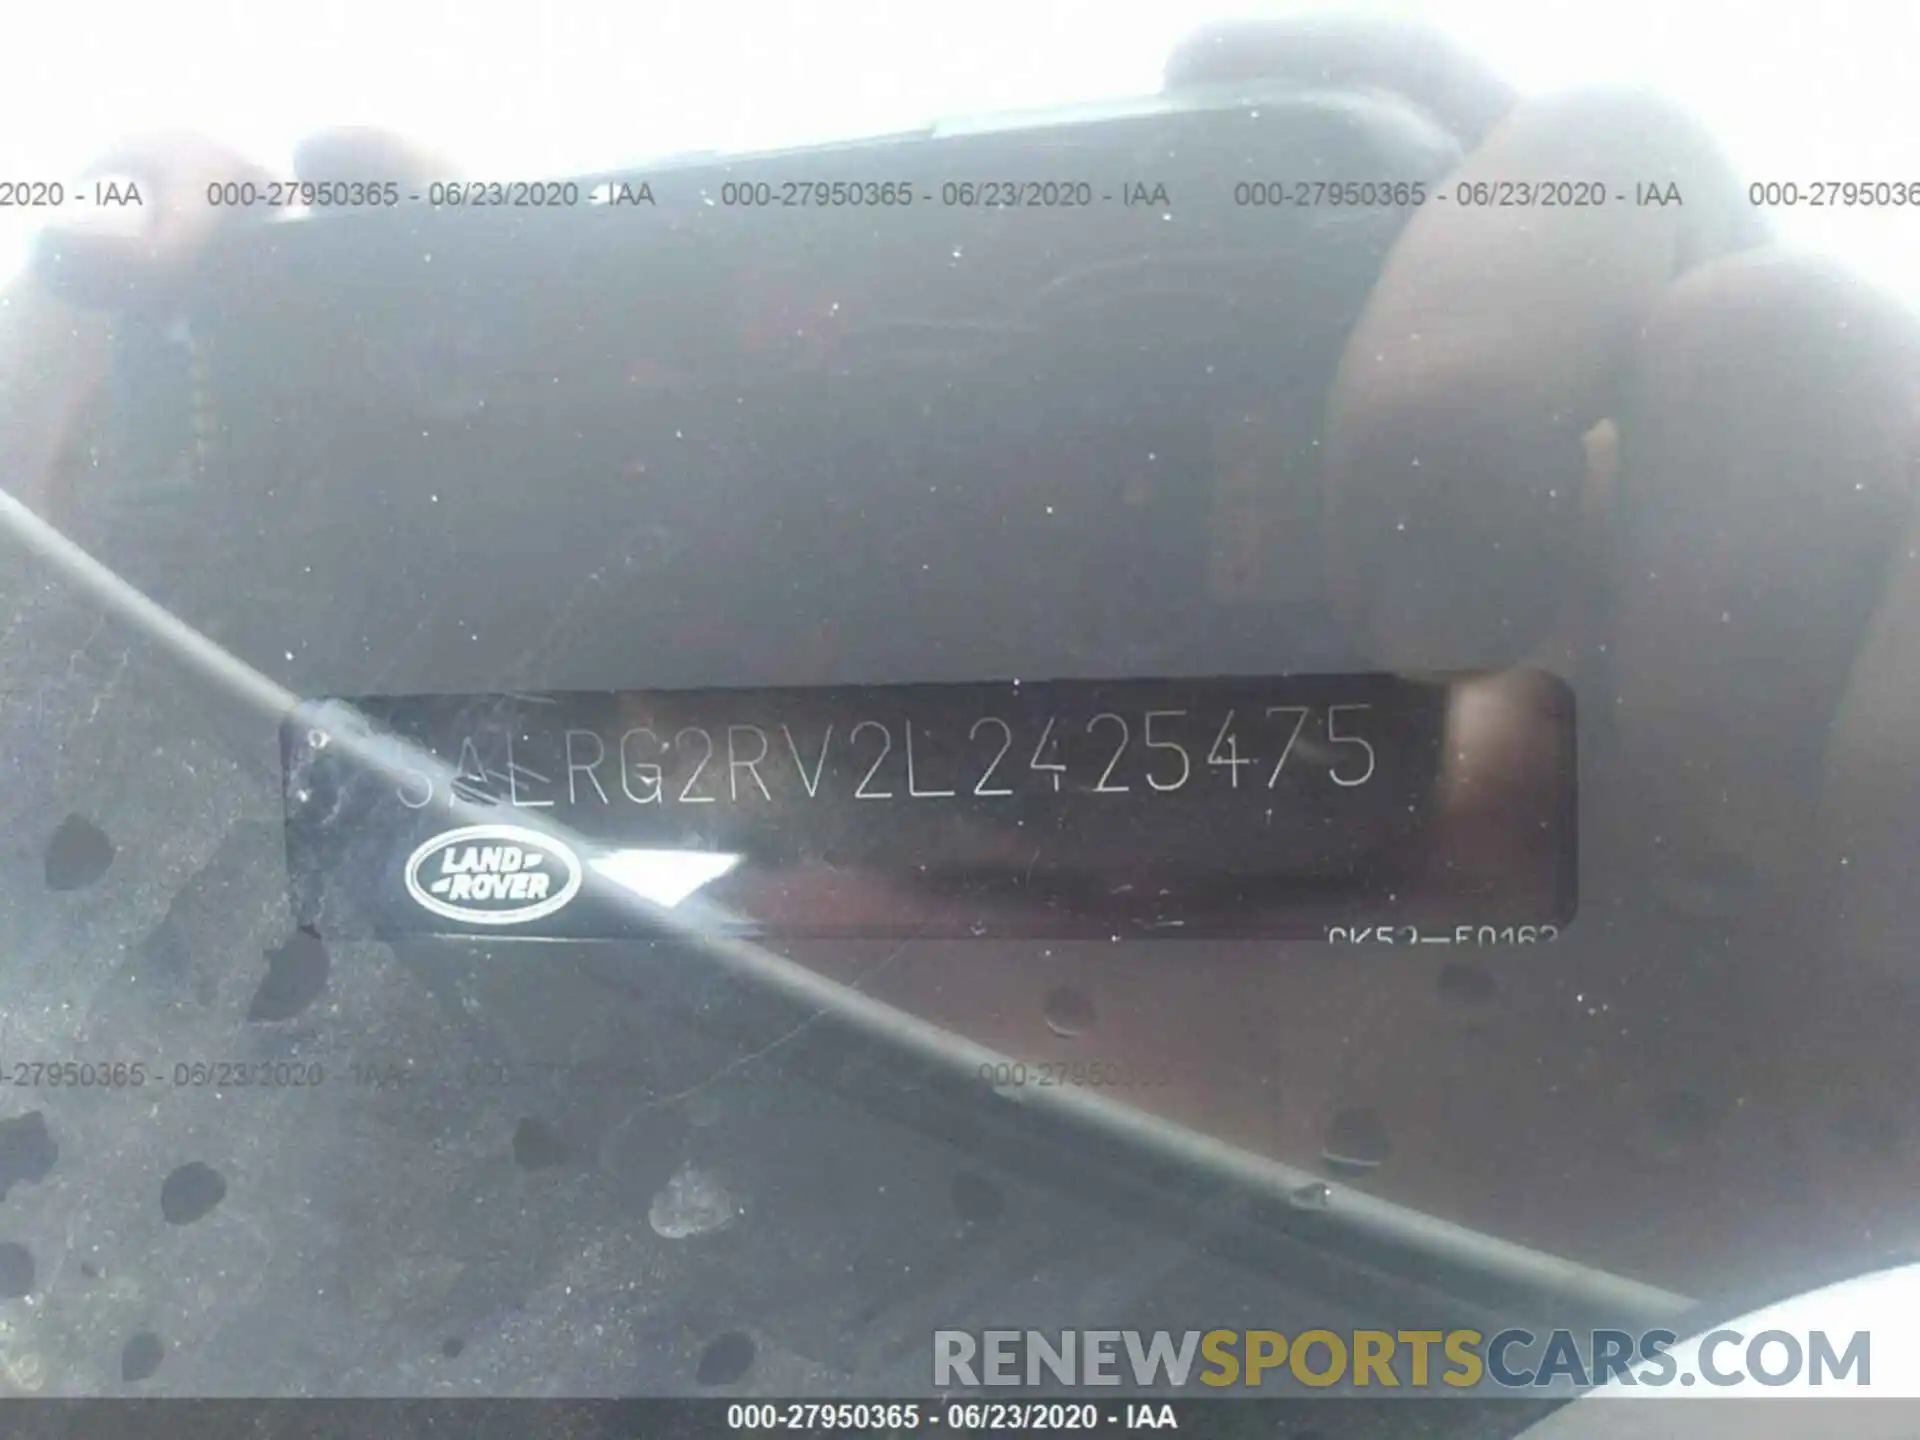 9 Photograph of a damaged car SALRG2RV2L2425475 LAND ROVER DISCOVERY 2020